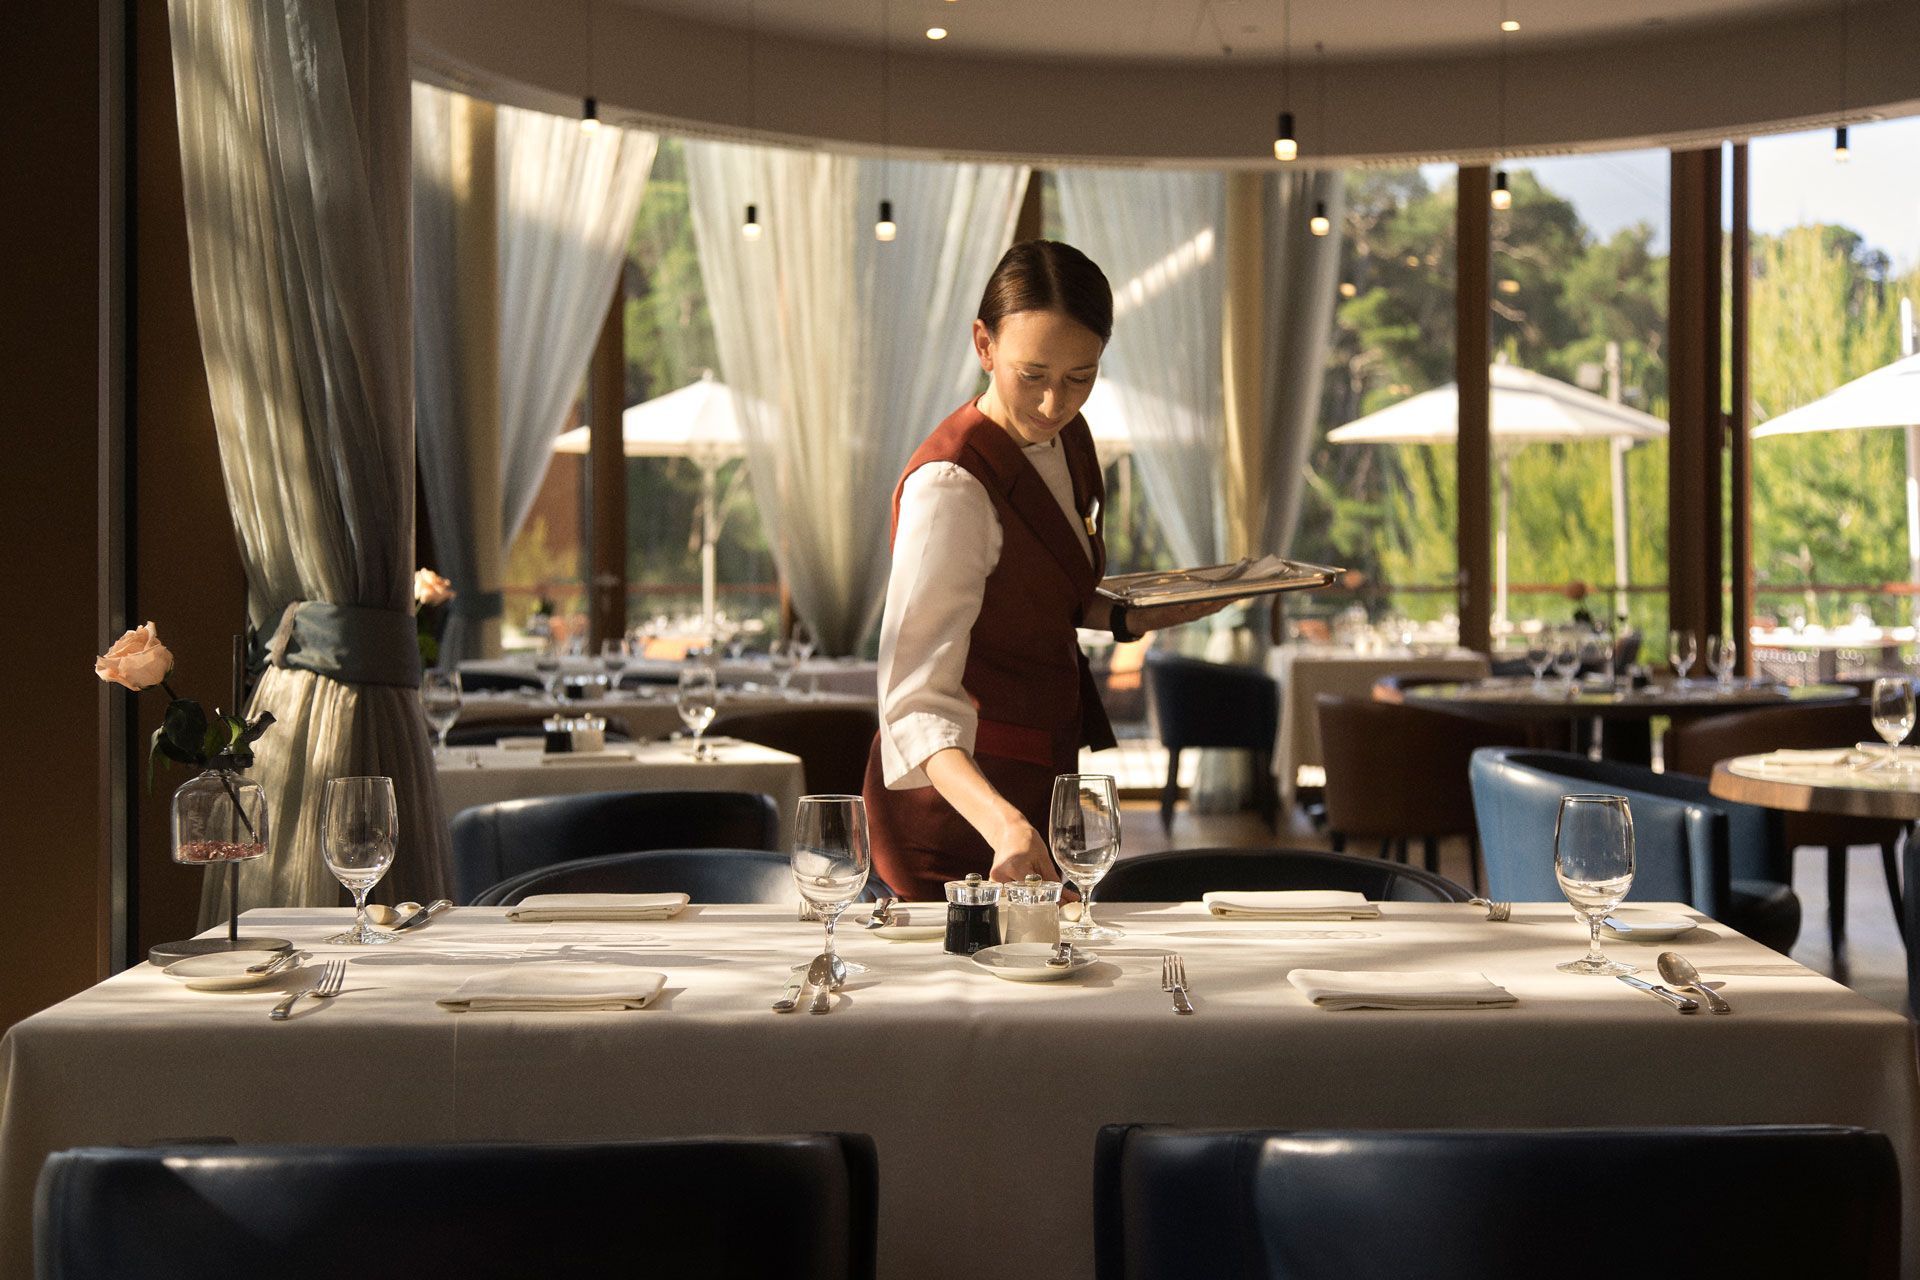  A waitress setting a table in an elegant dining room with large windows and soft natural light